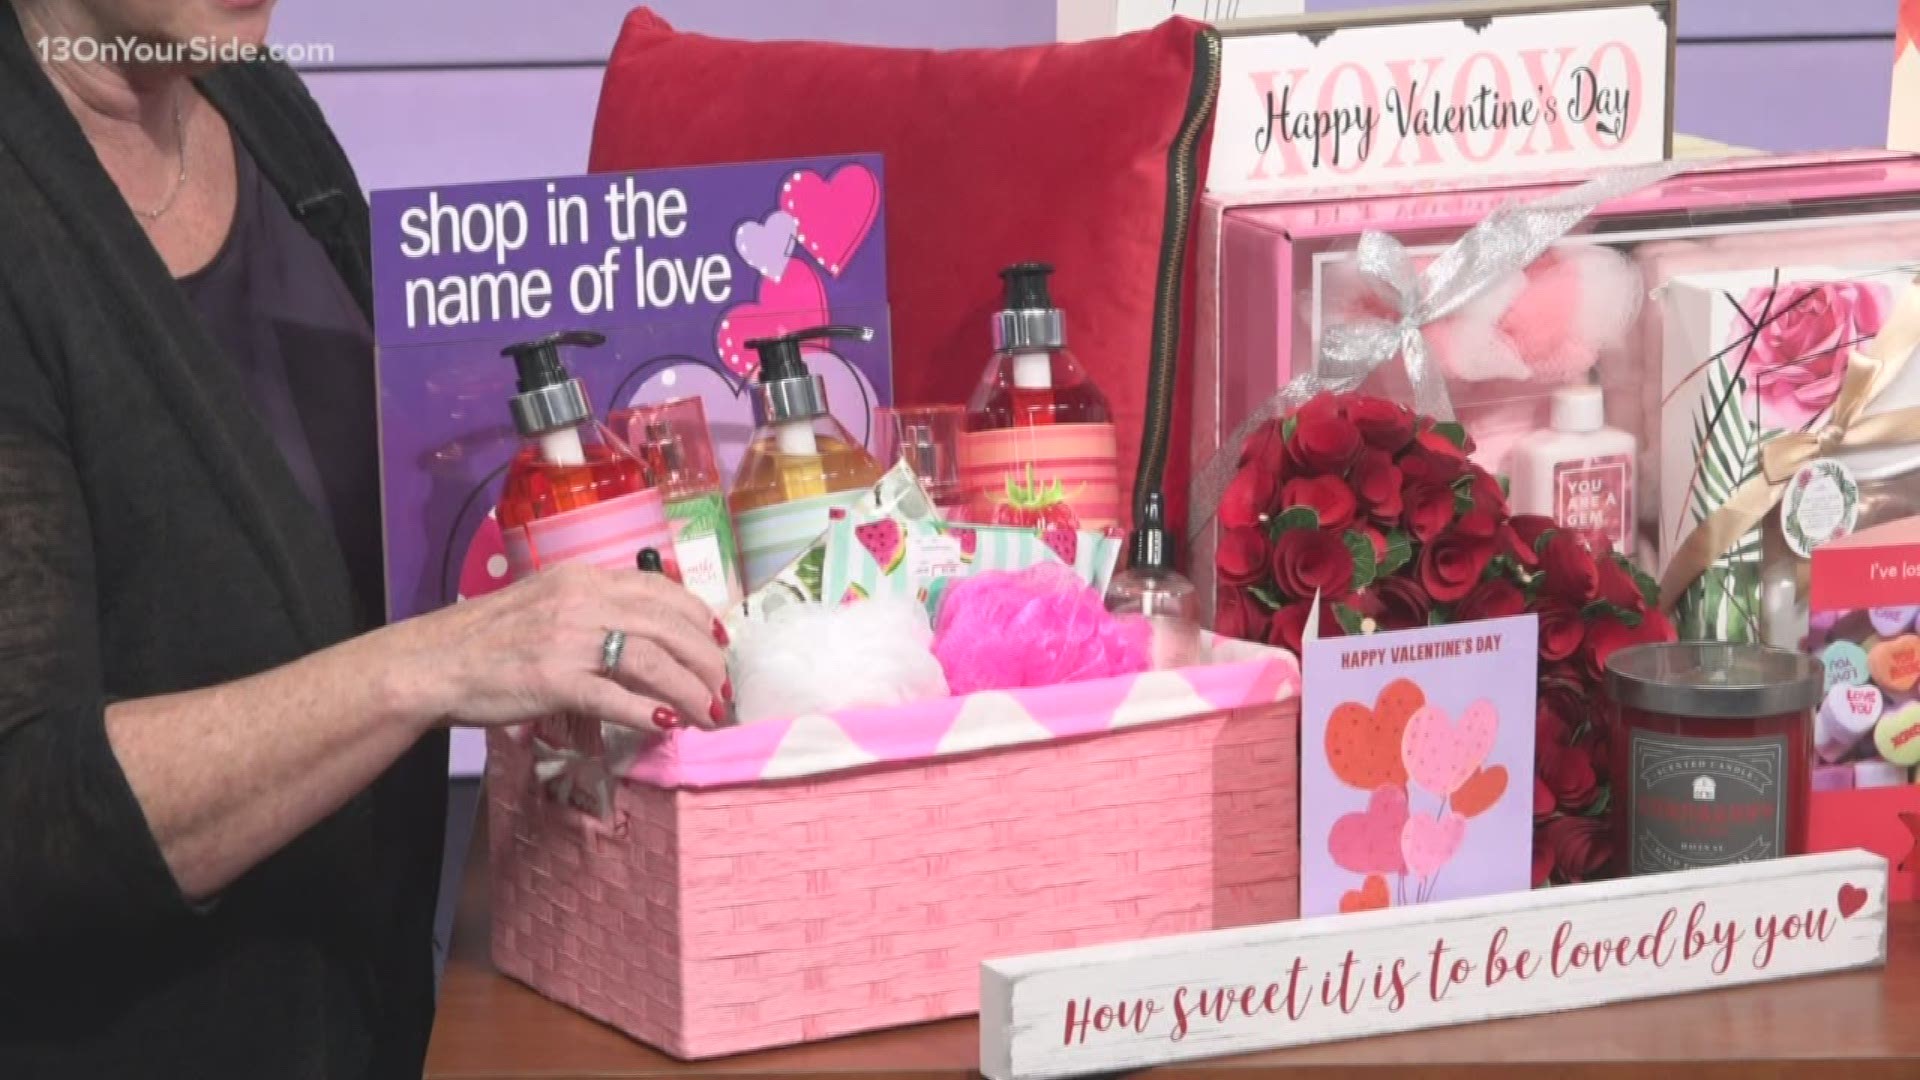 25 Valentine's Day Gift Ideas for Him or Her - Focus on the Family